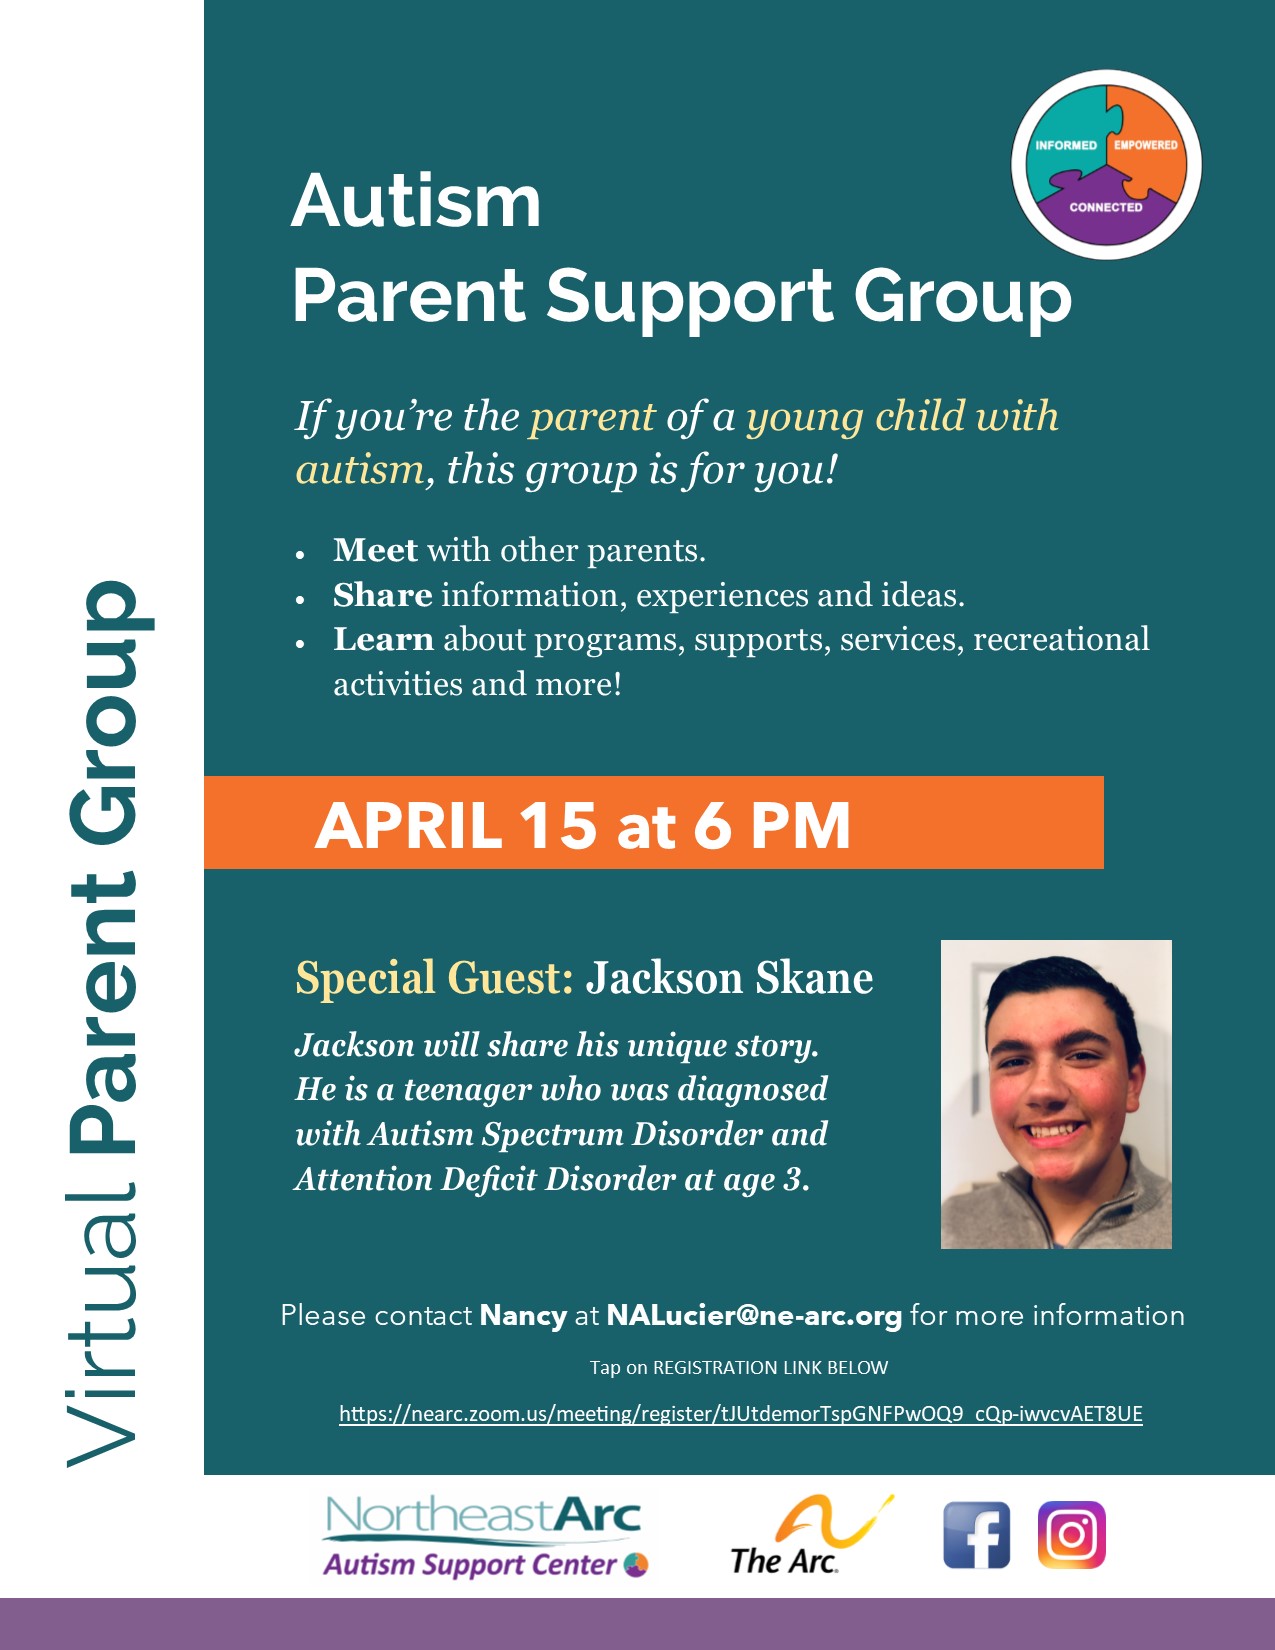 Flyer for Autism Parent Support Group, for parents of young children with autism up to 10 years old. Special Guest Speaker Jackson Skane on Thursday April 15 at 6PM. Please contact Nancy at NALucier@ne-arc.org for more information.